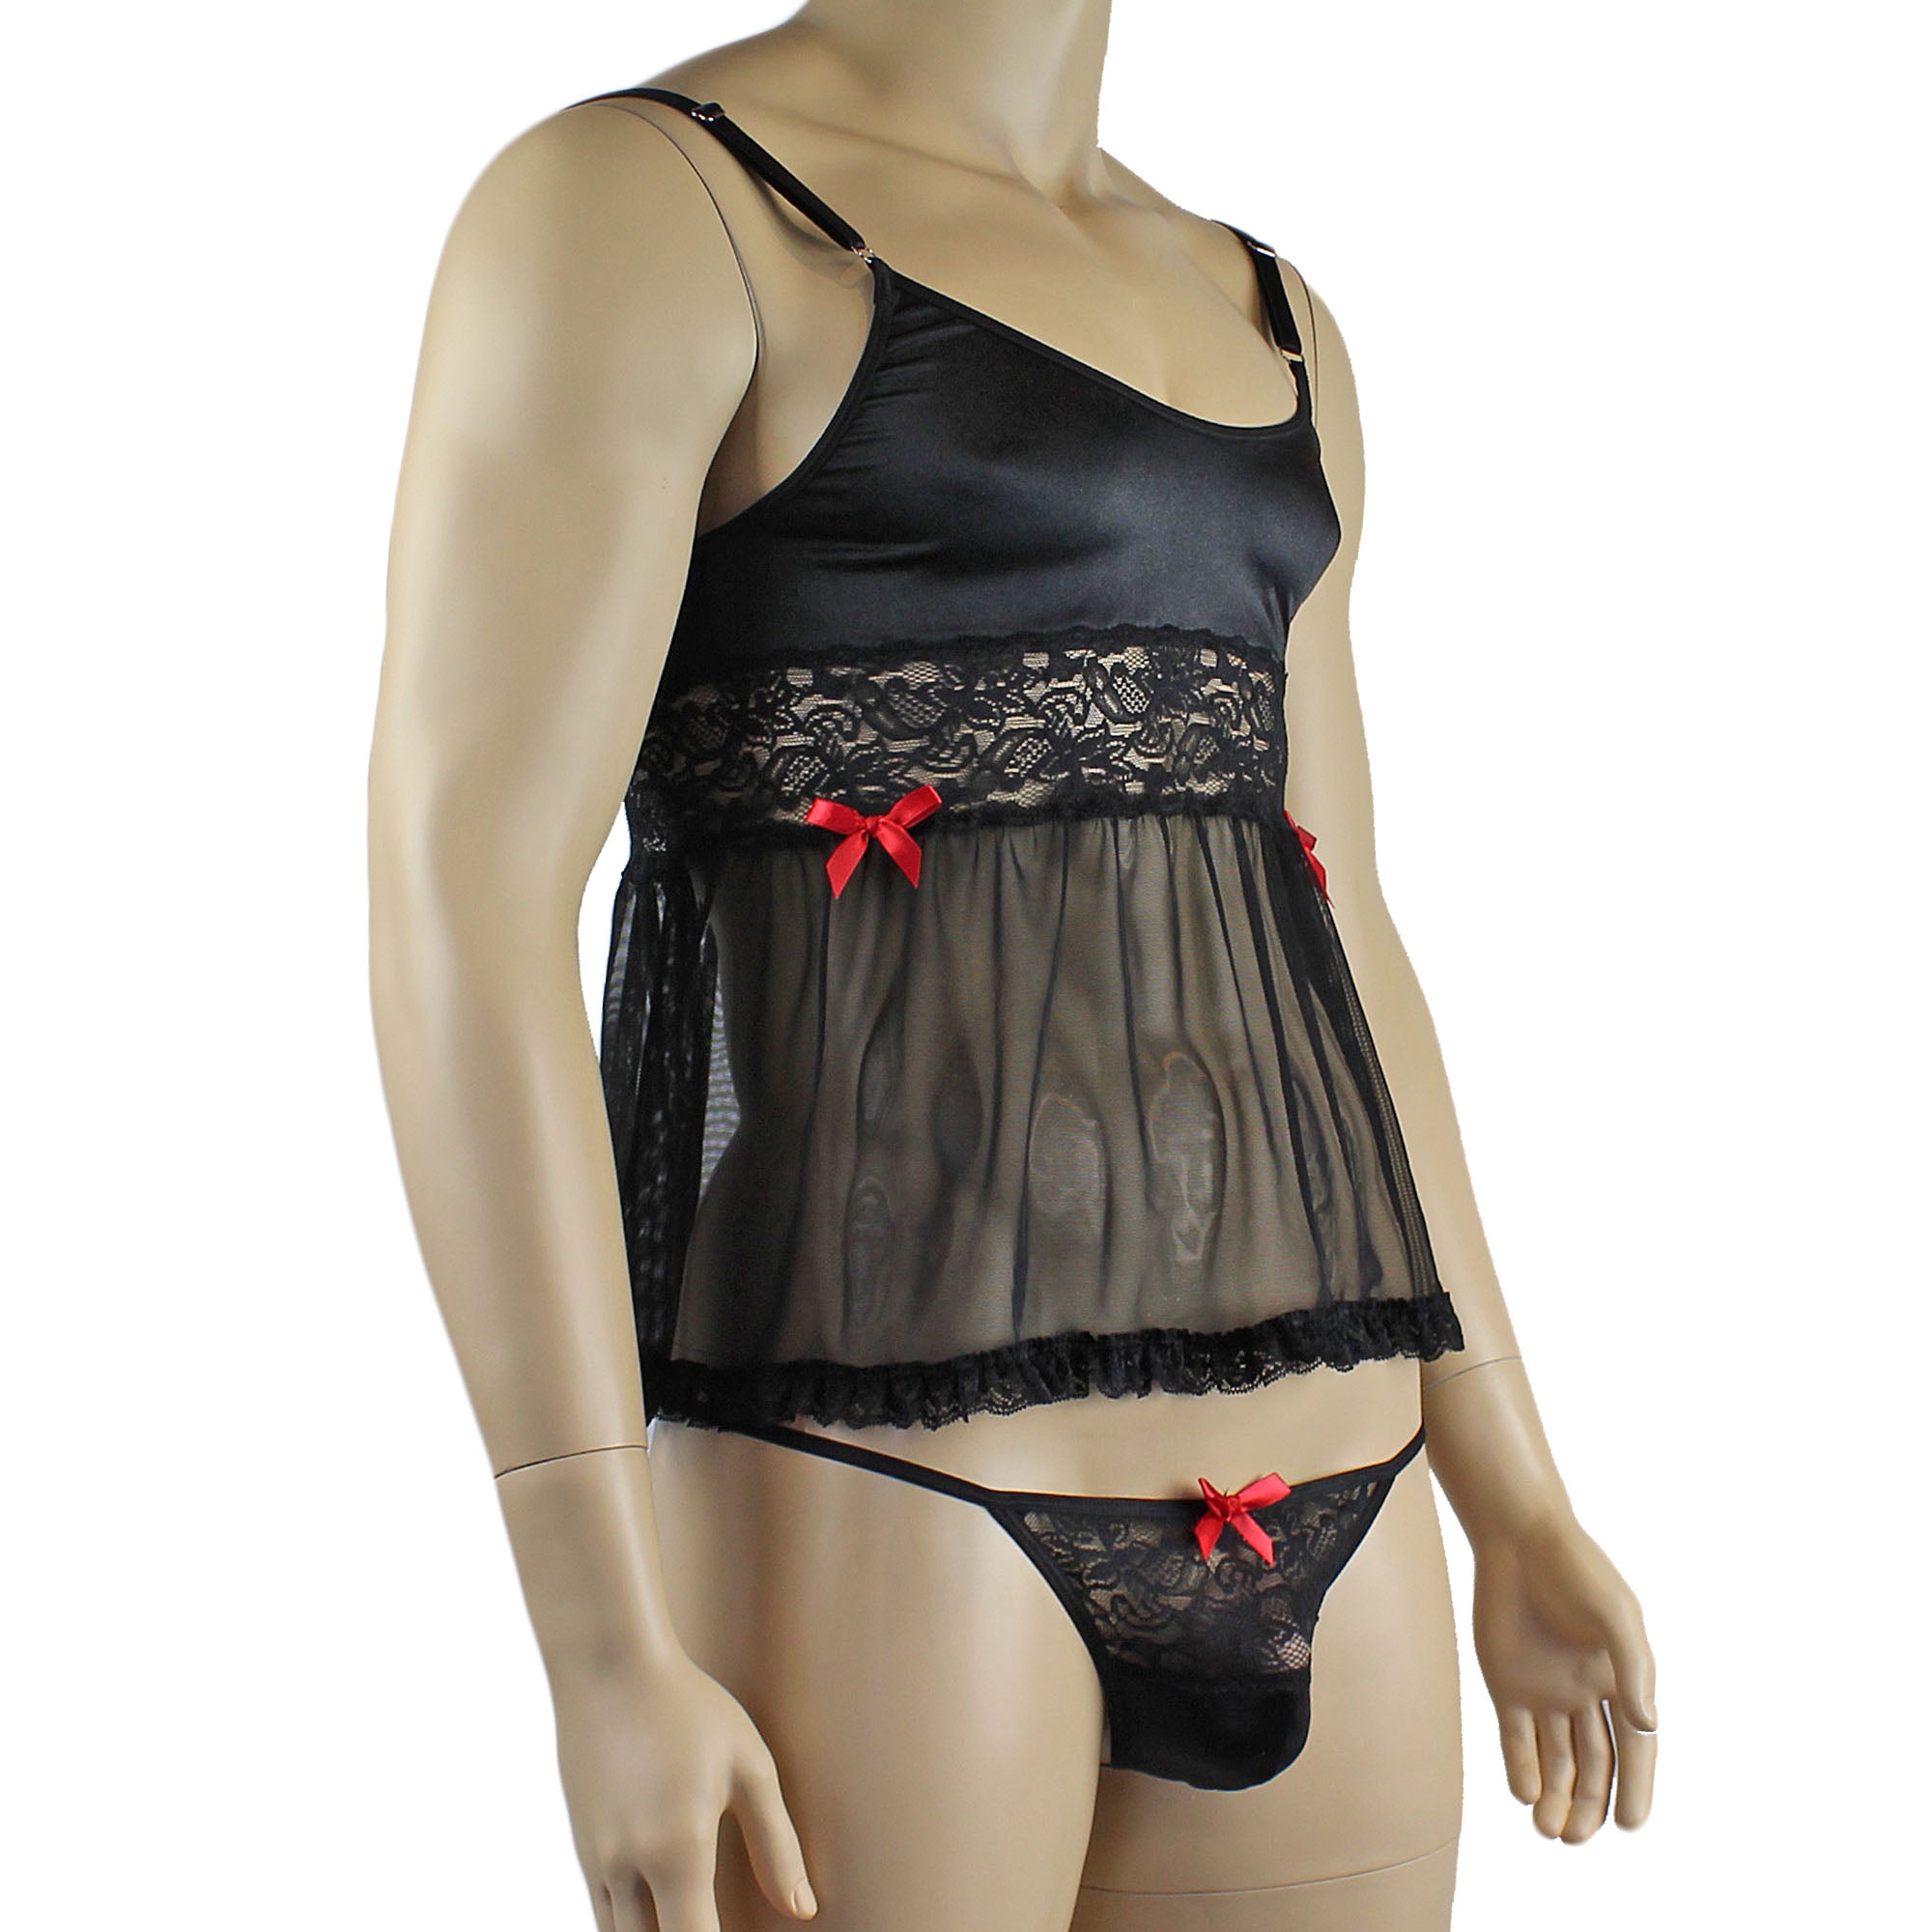 Mens Joanne Mini Babydoll Camisole & G string - Sizes up to 3XL Black and Black Lace